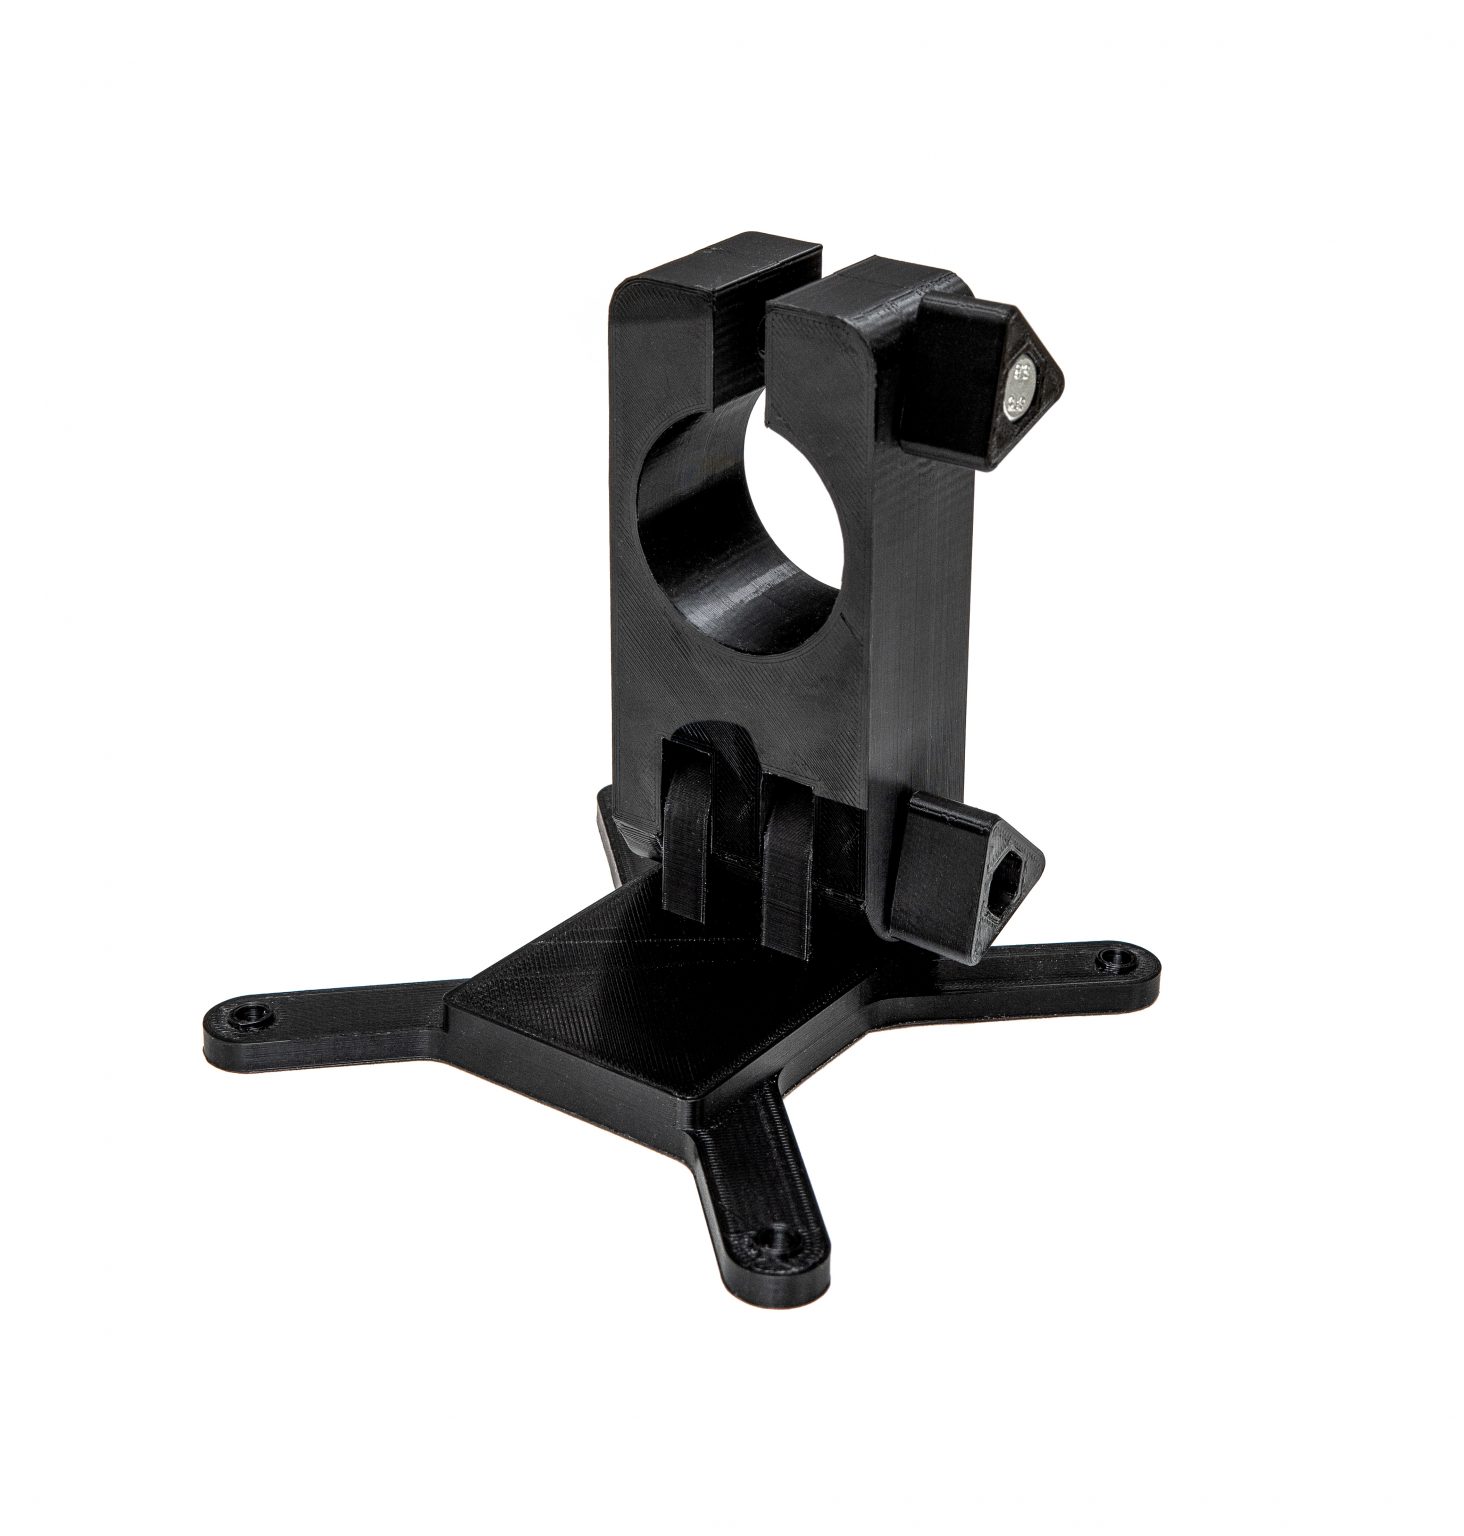 Monitor mount isolate on a white background. Black detail mount printed on a 3D printer.